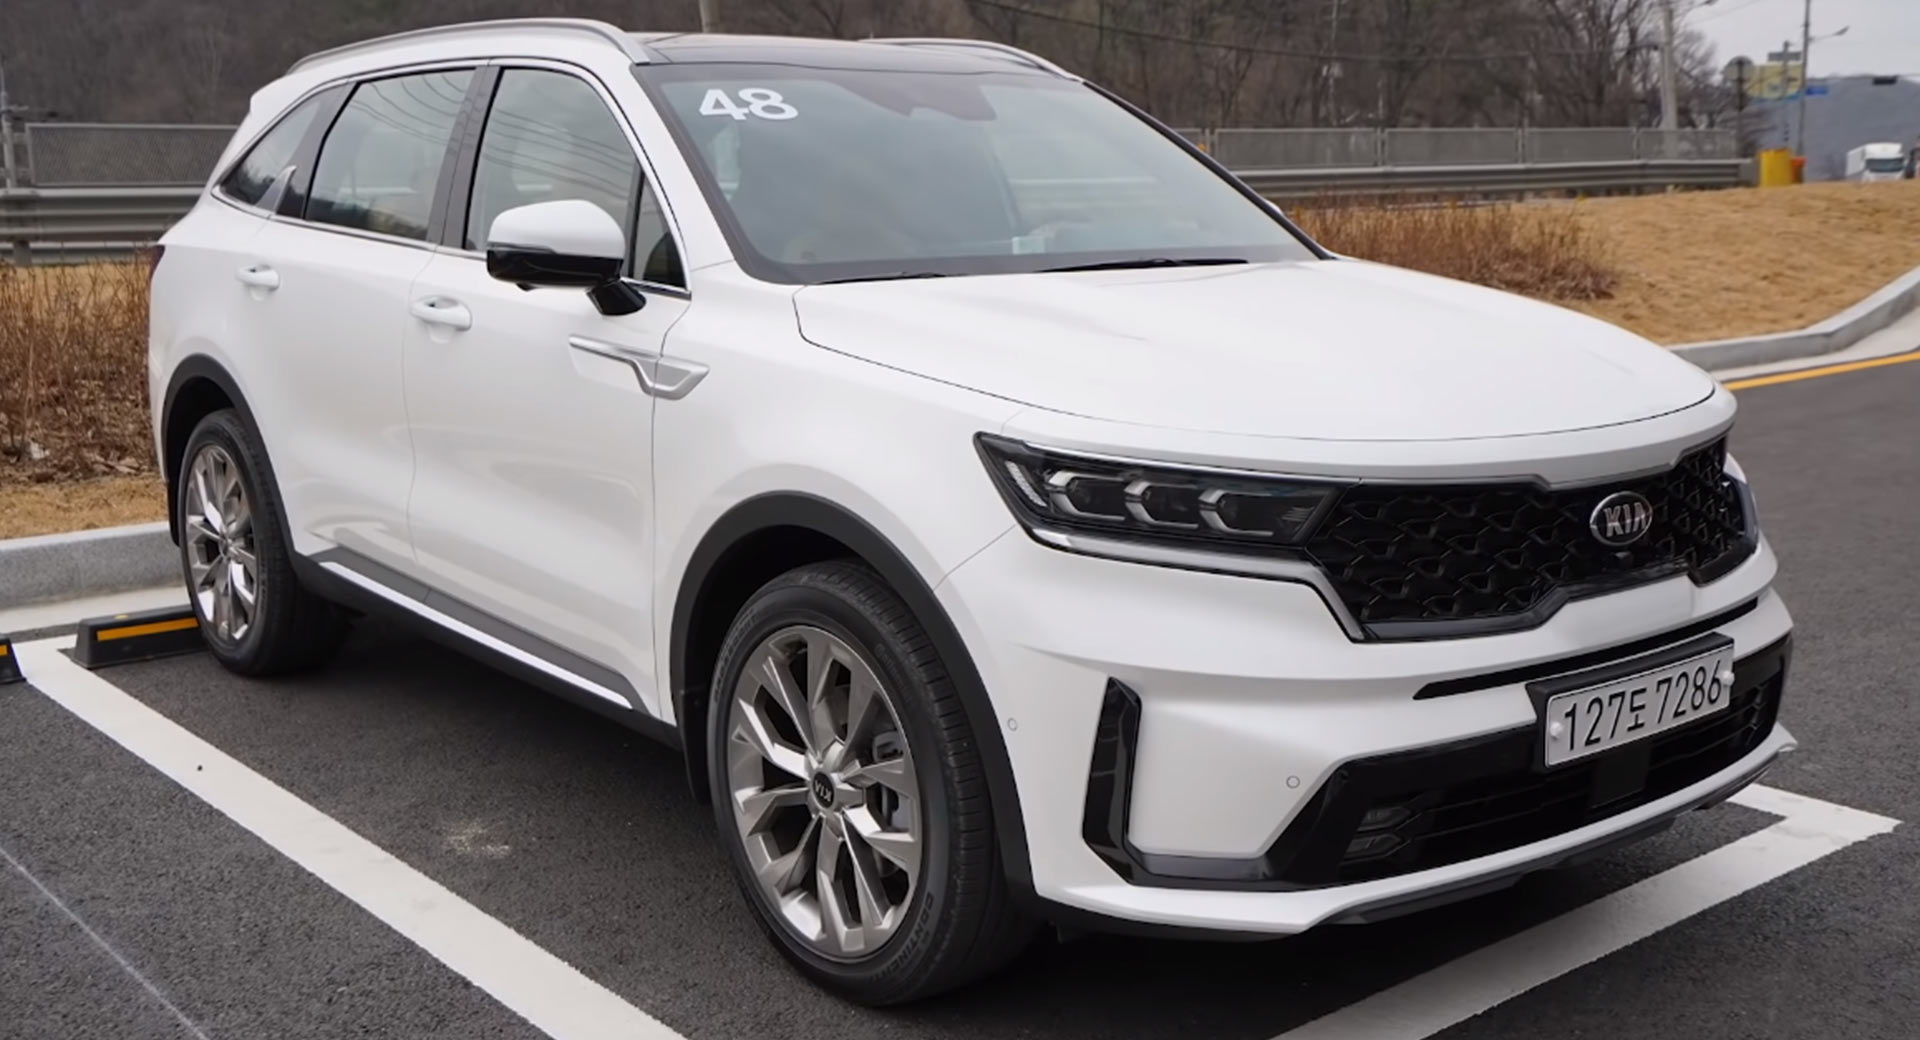 Early Review Of 2021 Kia Sorento Has Good Things To Say | Carscoops